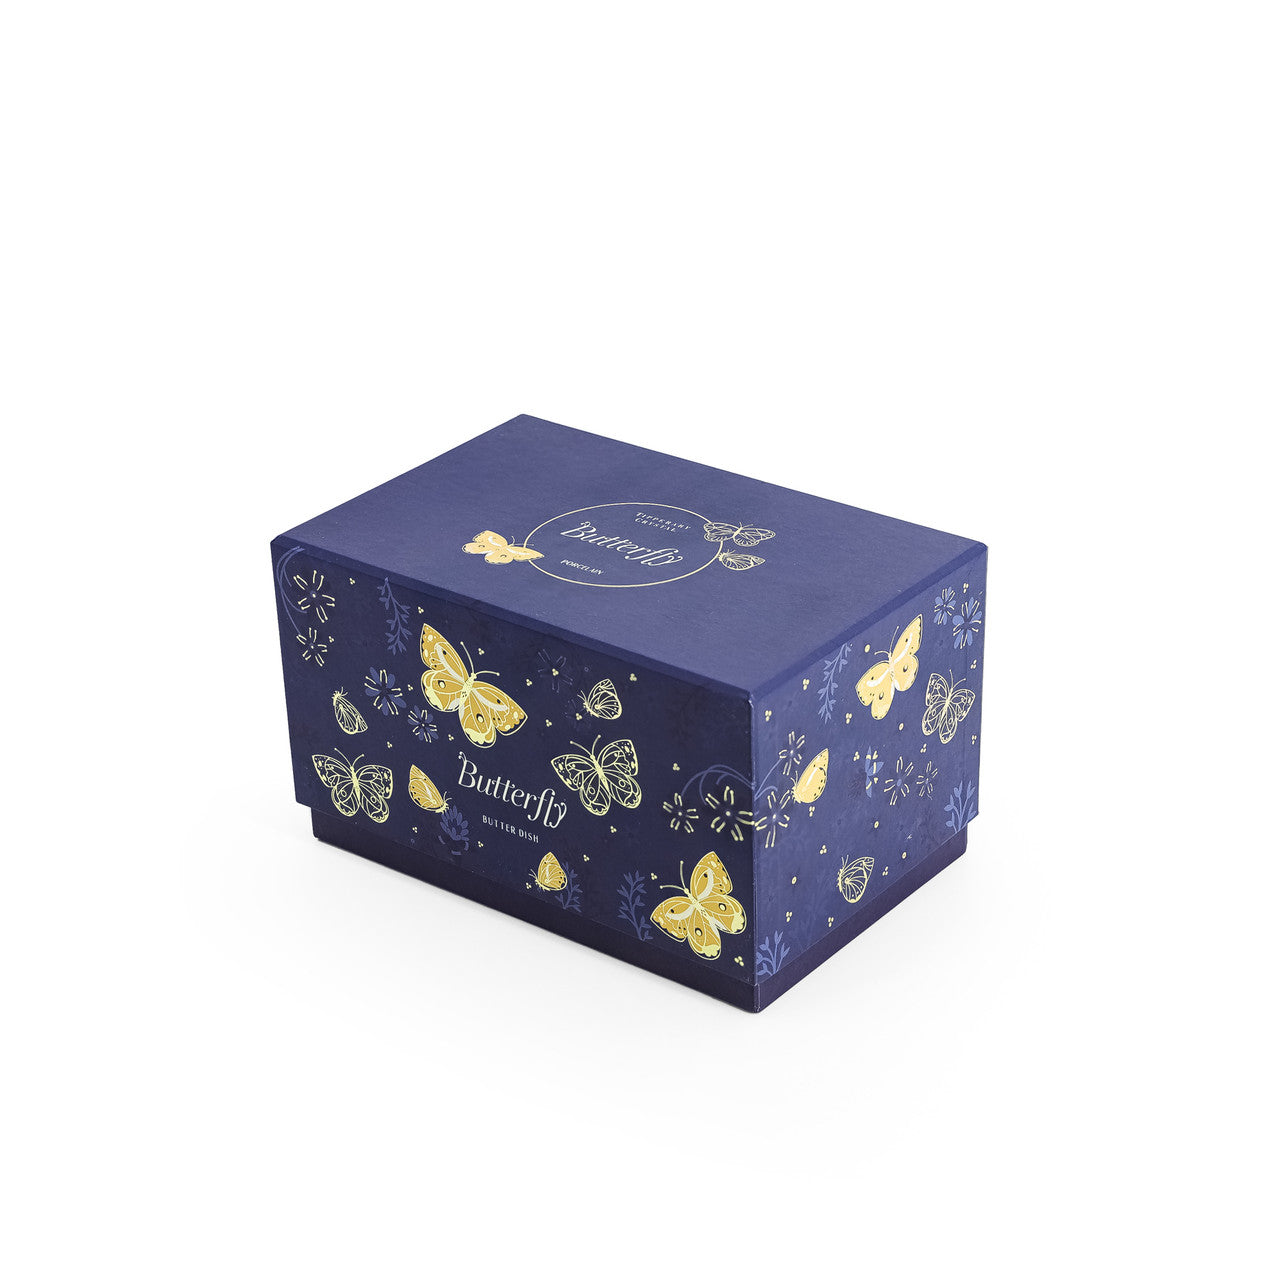 Tipperary Crystal Butterfly Butter Dish - NEW 2022  Drawing inspiration from urban garden, the Tipperary Crystal Butterfly collection transforms an icon into something modern and unexpected. Playful and elegant, this collection draws from the inherent beauty of the butterfly.